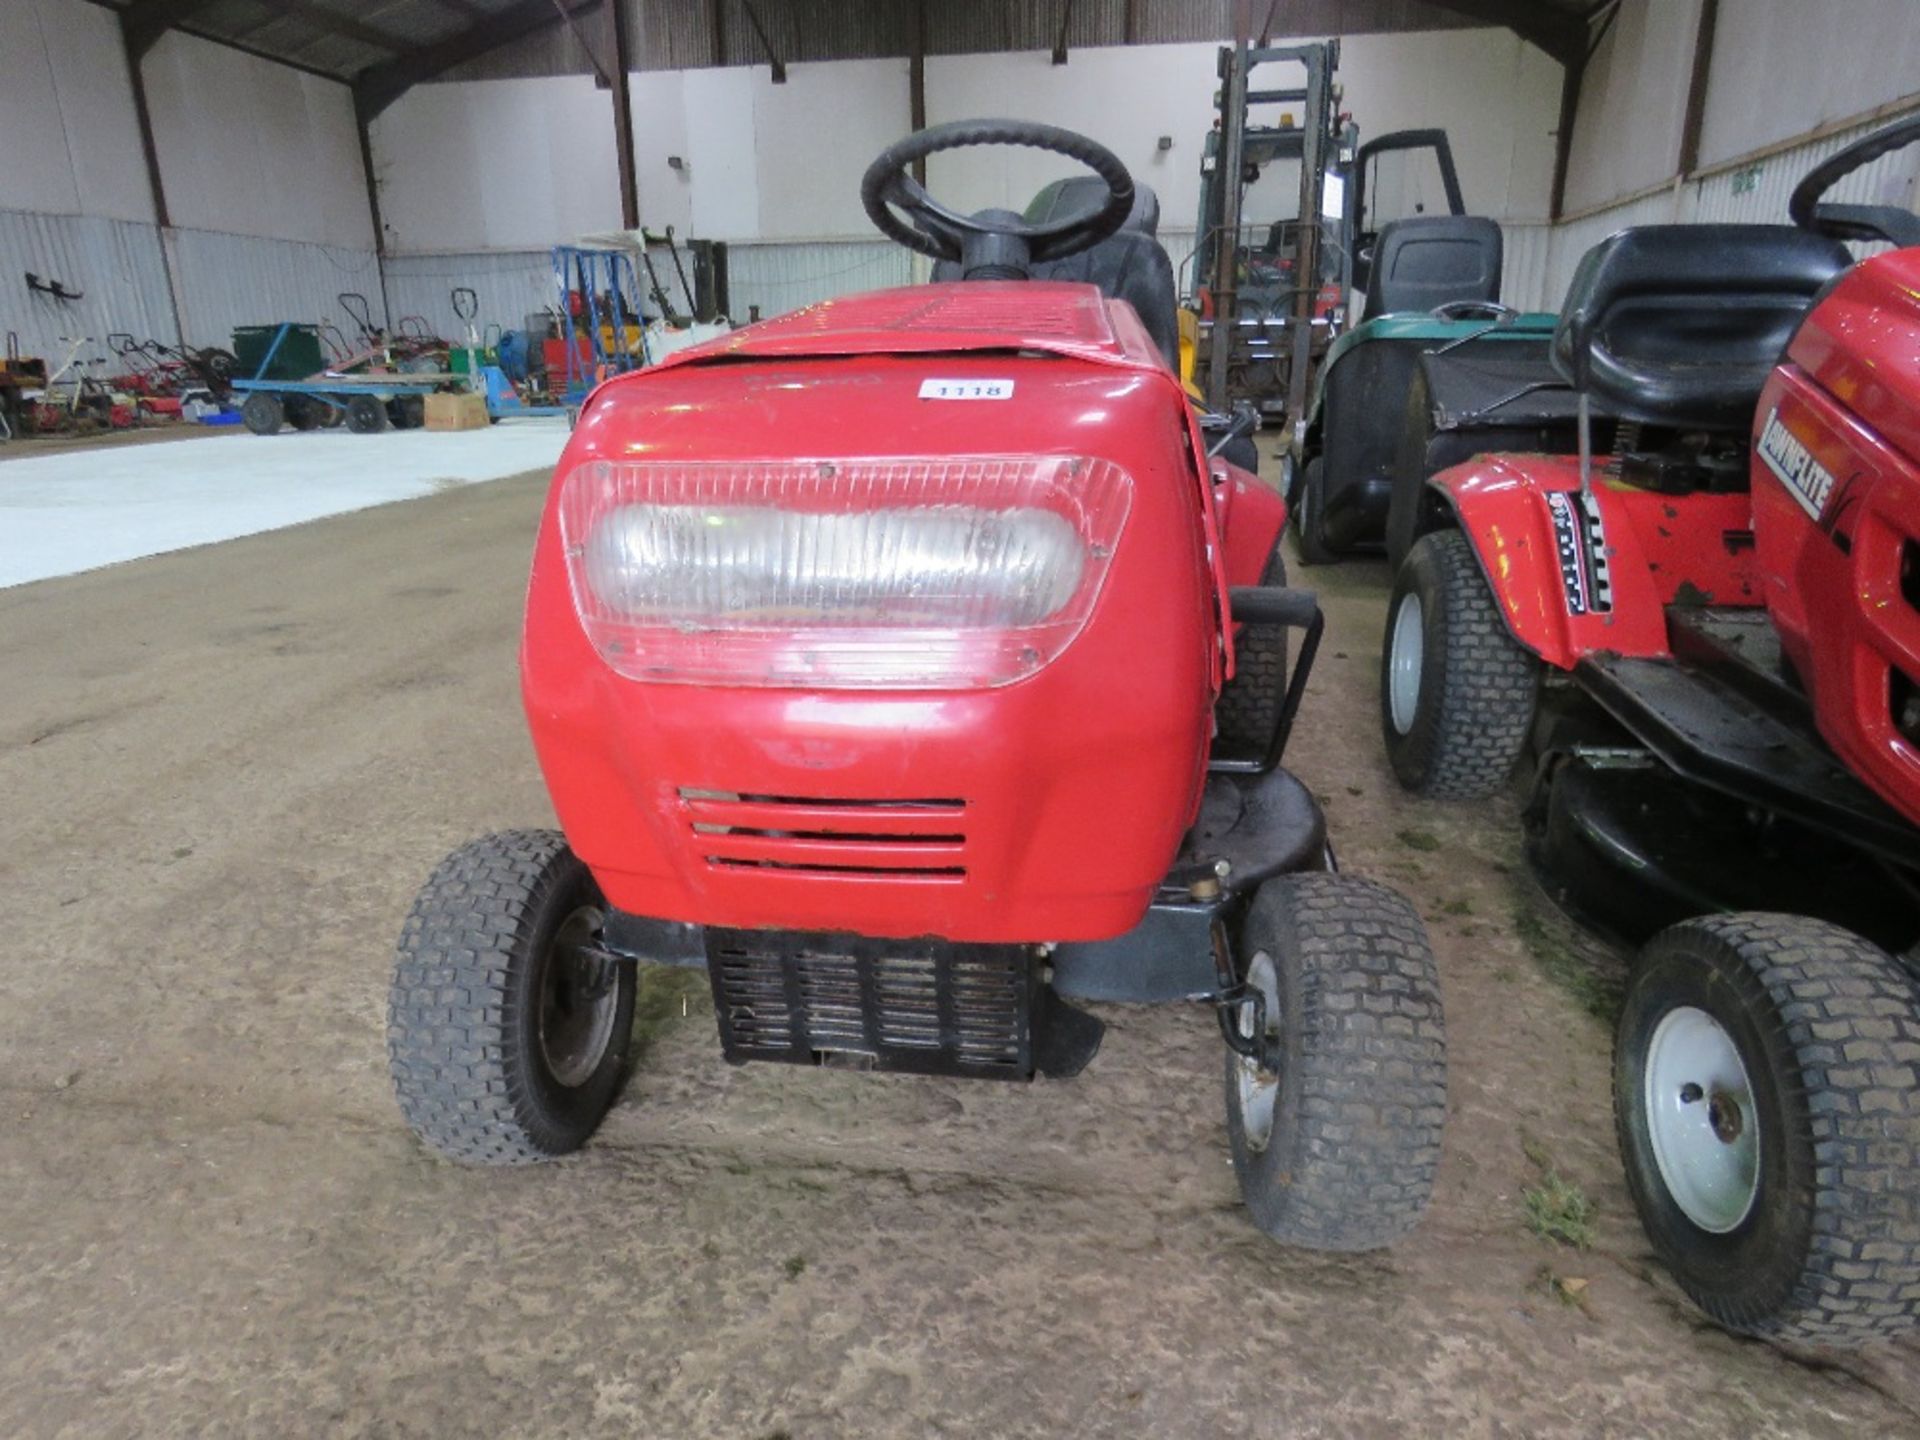 MTD SPIDER 76RD RIDER RIDE ON MOWER WITH COLLECTOR. WHEN BRIEFLY TESTED WAS SEEN TO RUN, DRIVE AND M - Image 3 of 10